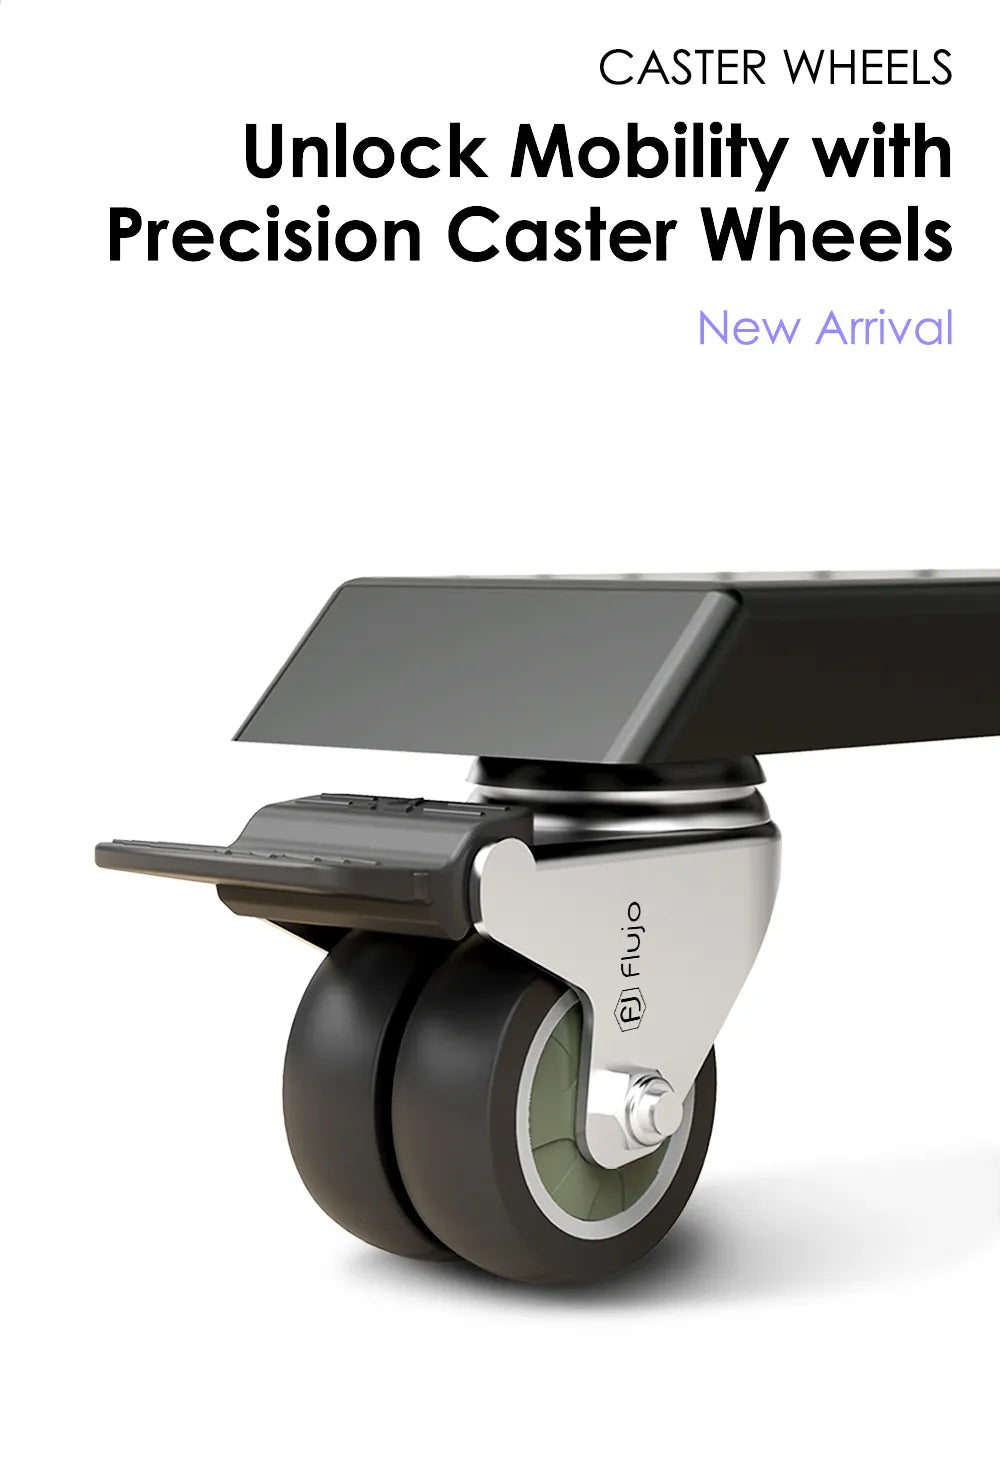 A close-up of a caster wheel attached to a standing desk leg, with the headline 'Unlock Mobility with Precision Caster Wheels' indicating new, smooth-rolling desk mobility solutions.